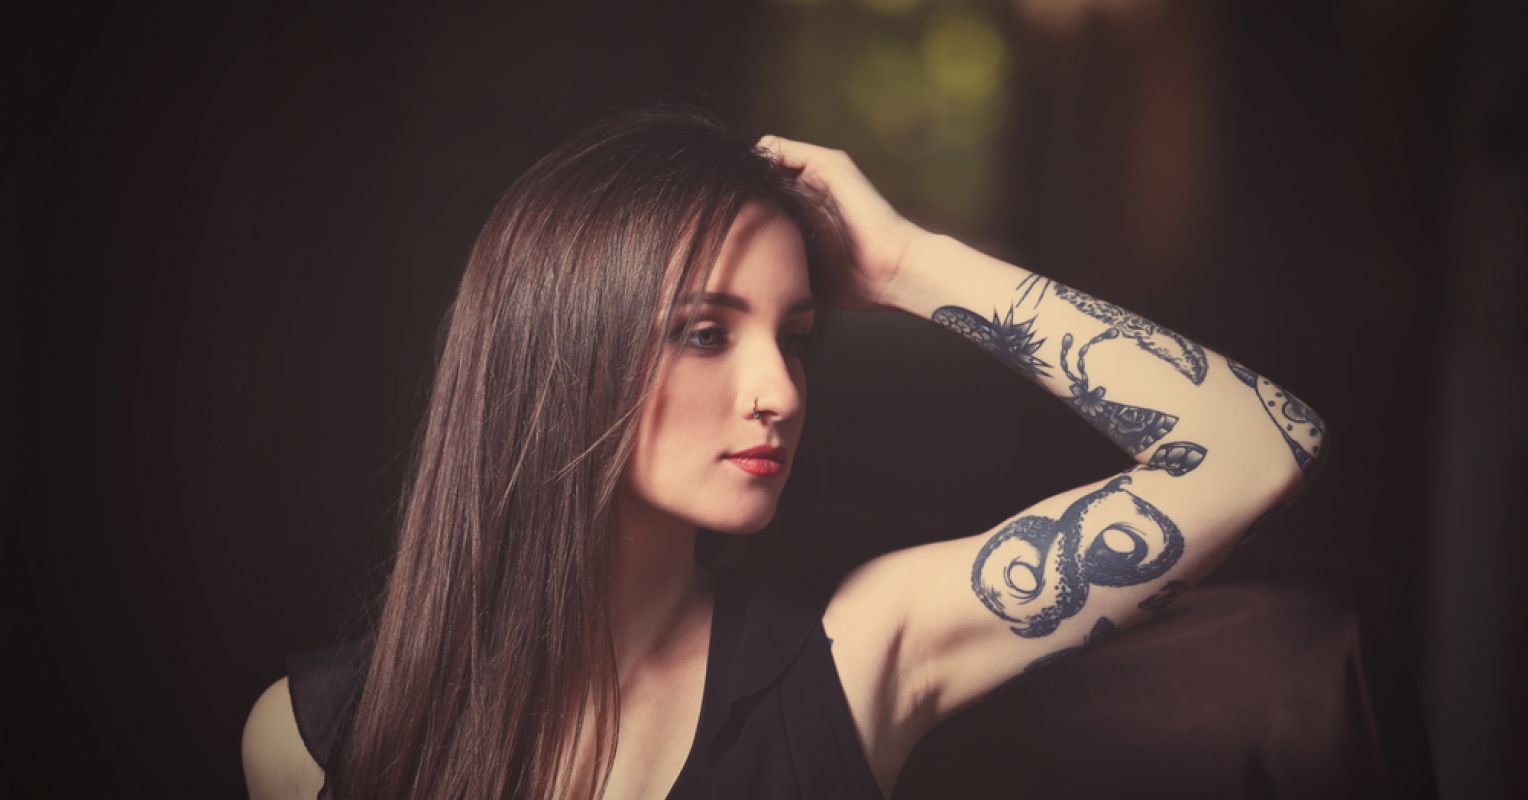 Beauty Marks A Brief History of Women and Tattoos